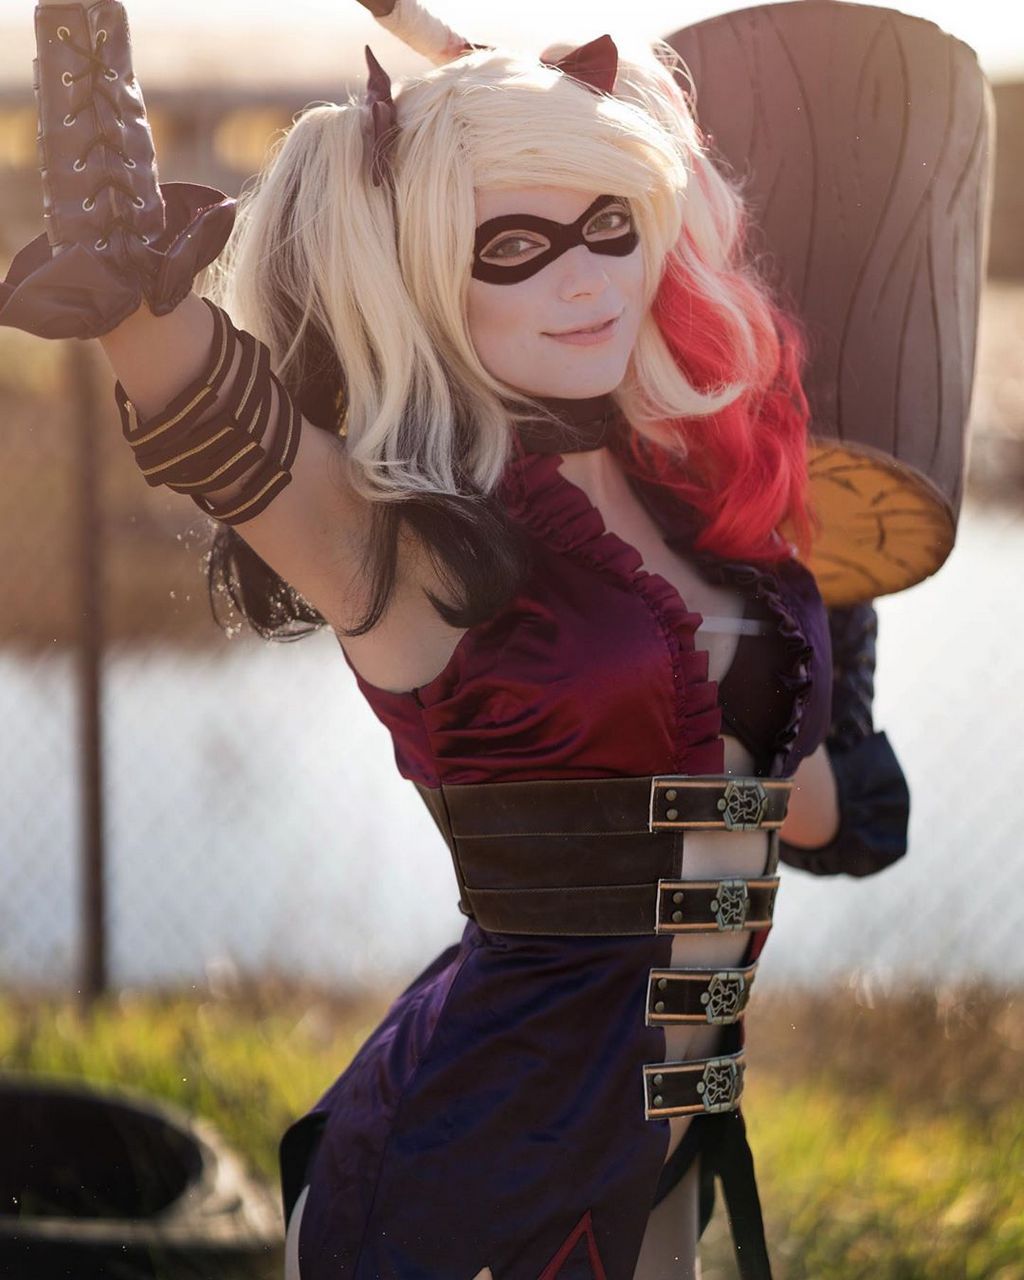 Jessakidding As Harley Quin